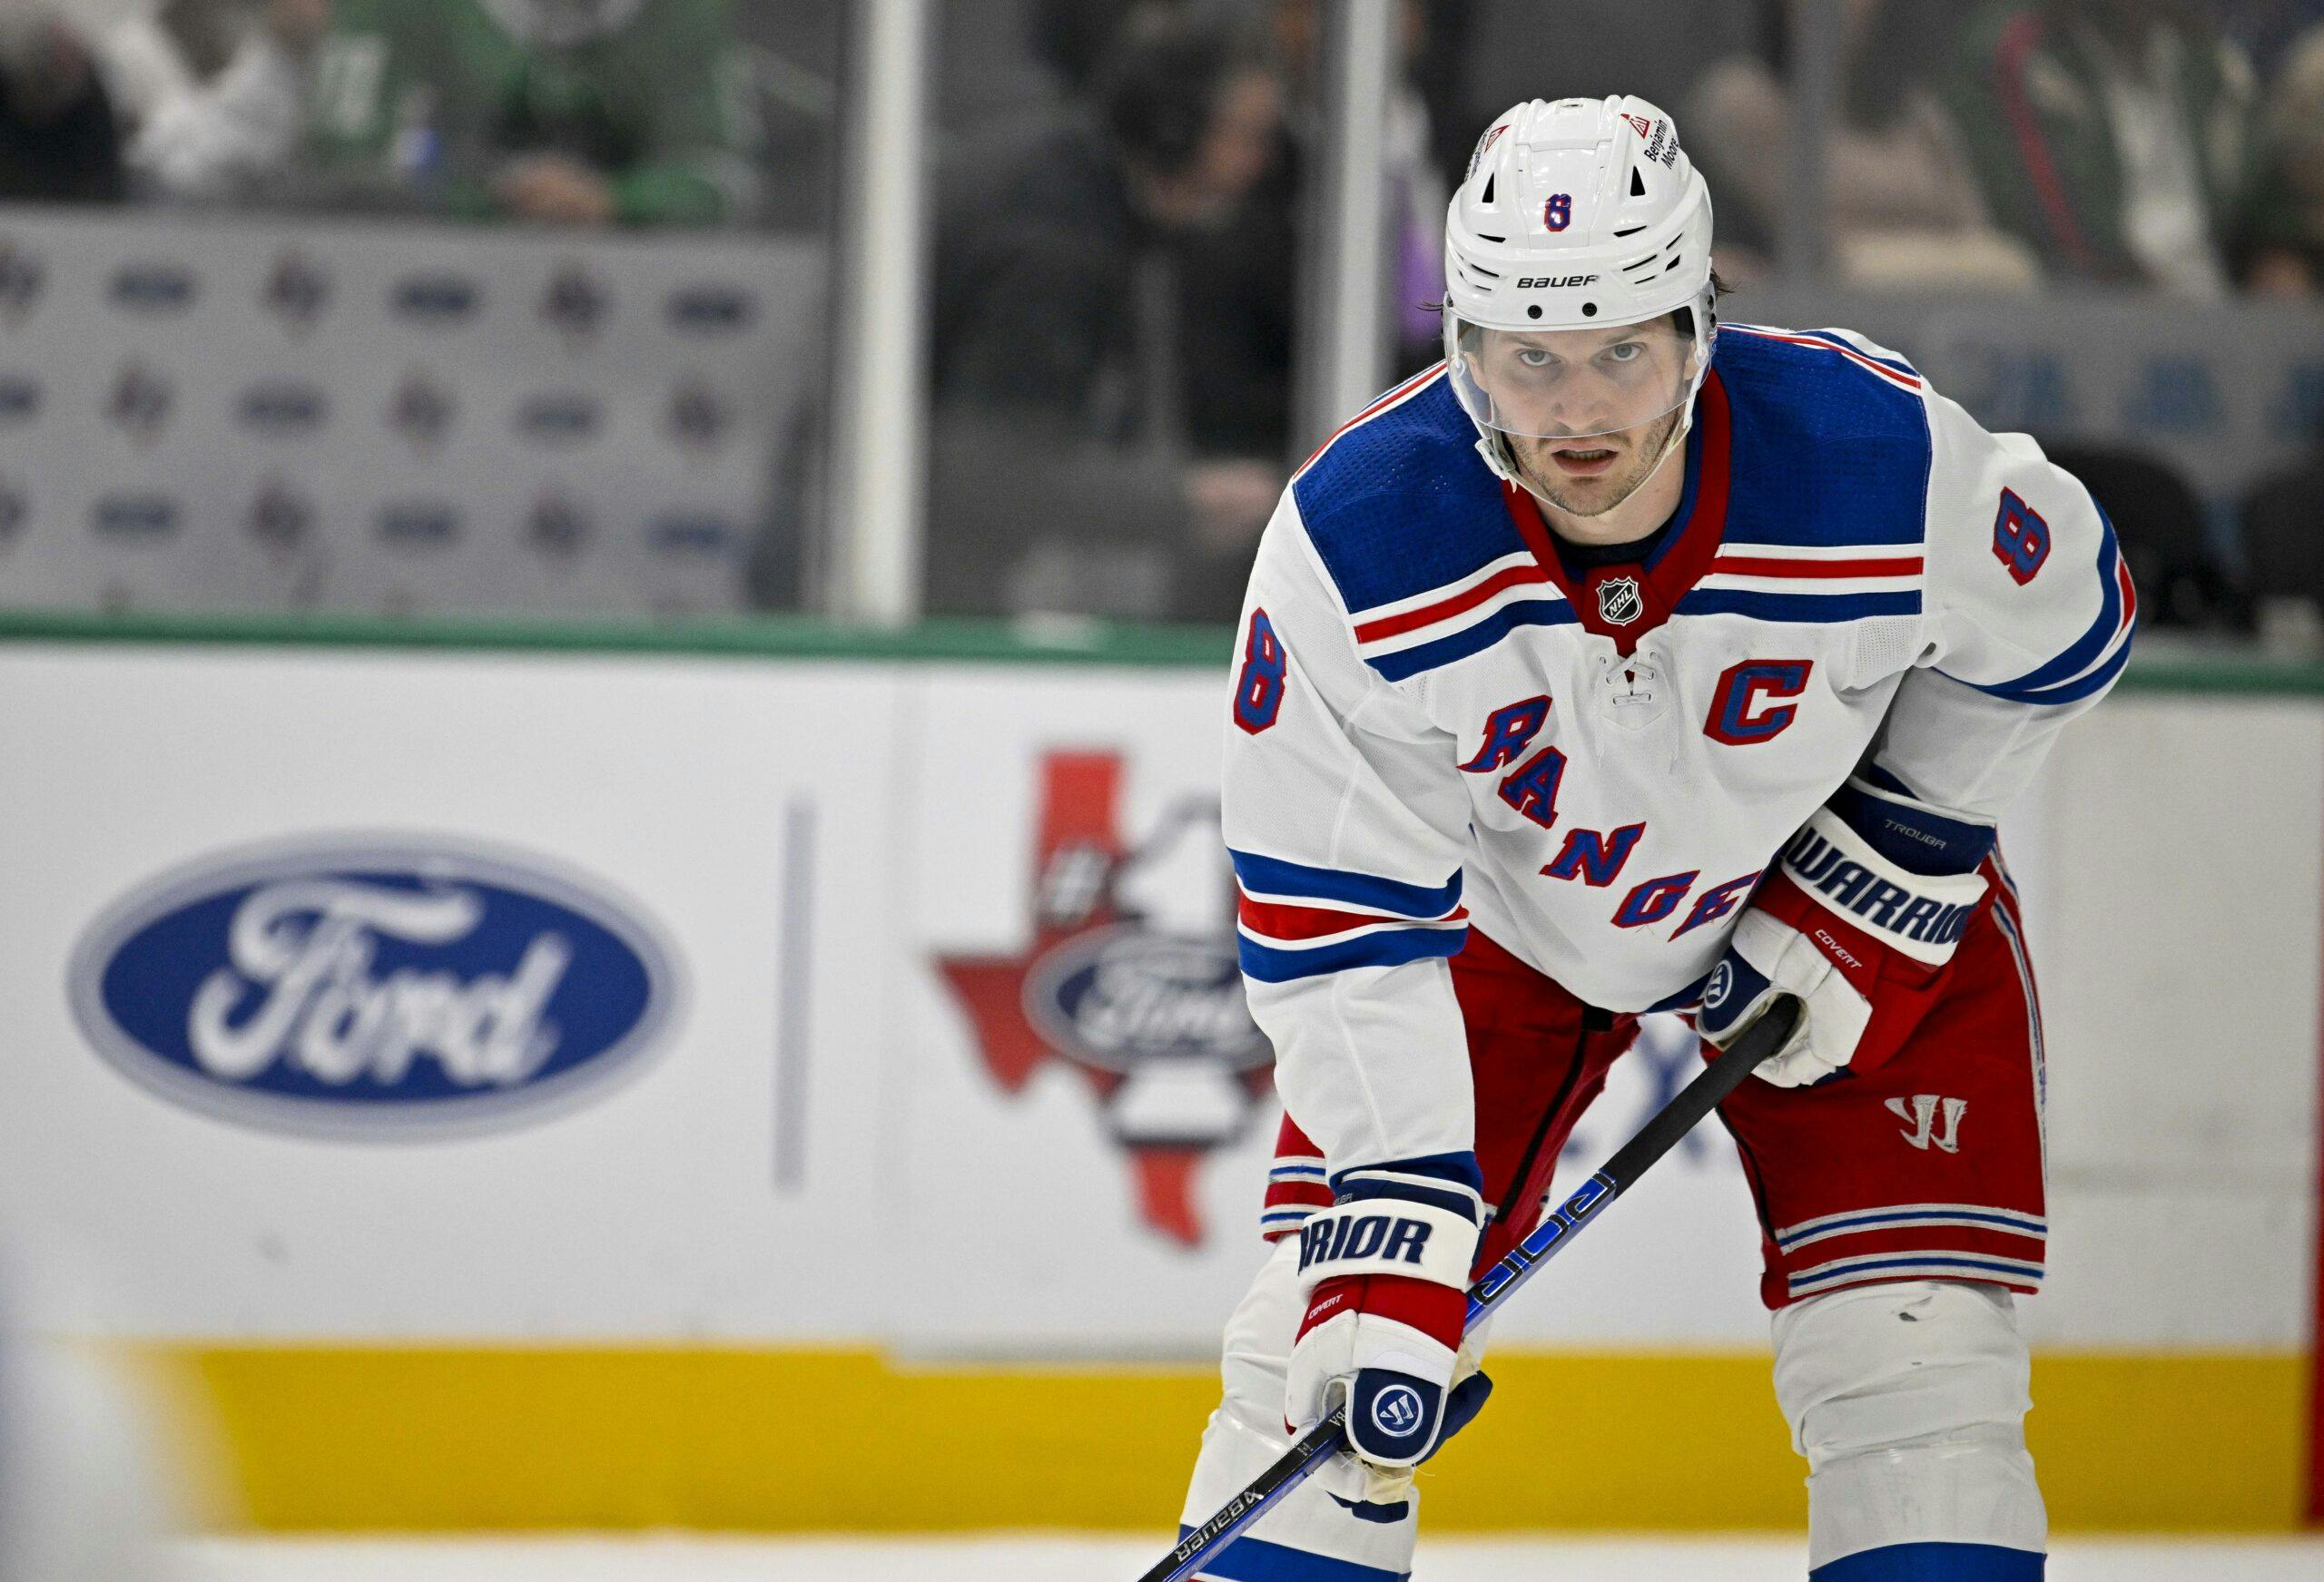 New York Rangers’ Jacob Trouba fined $5,000 for high-sticking